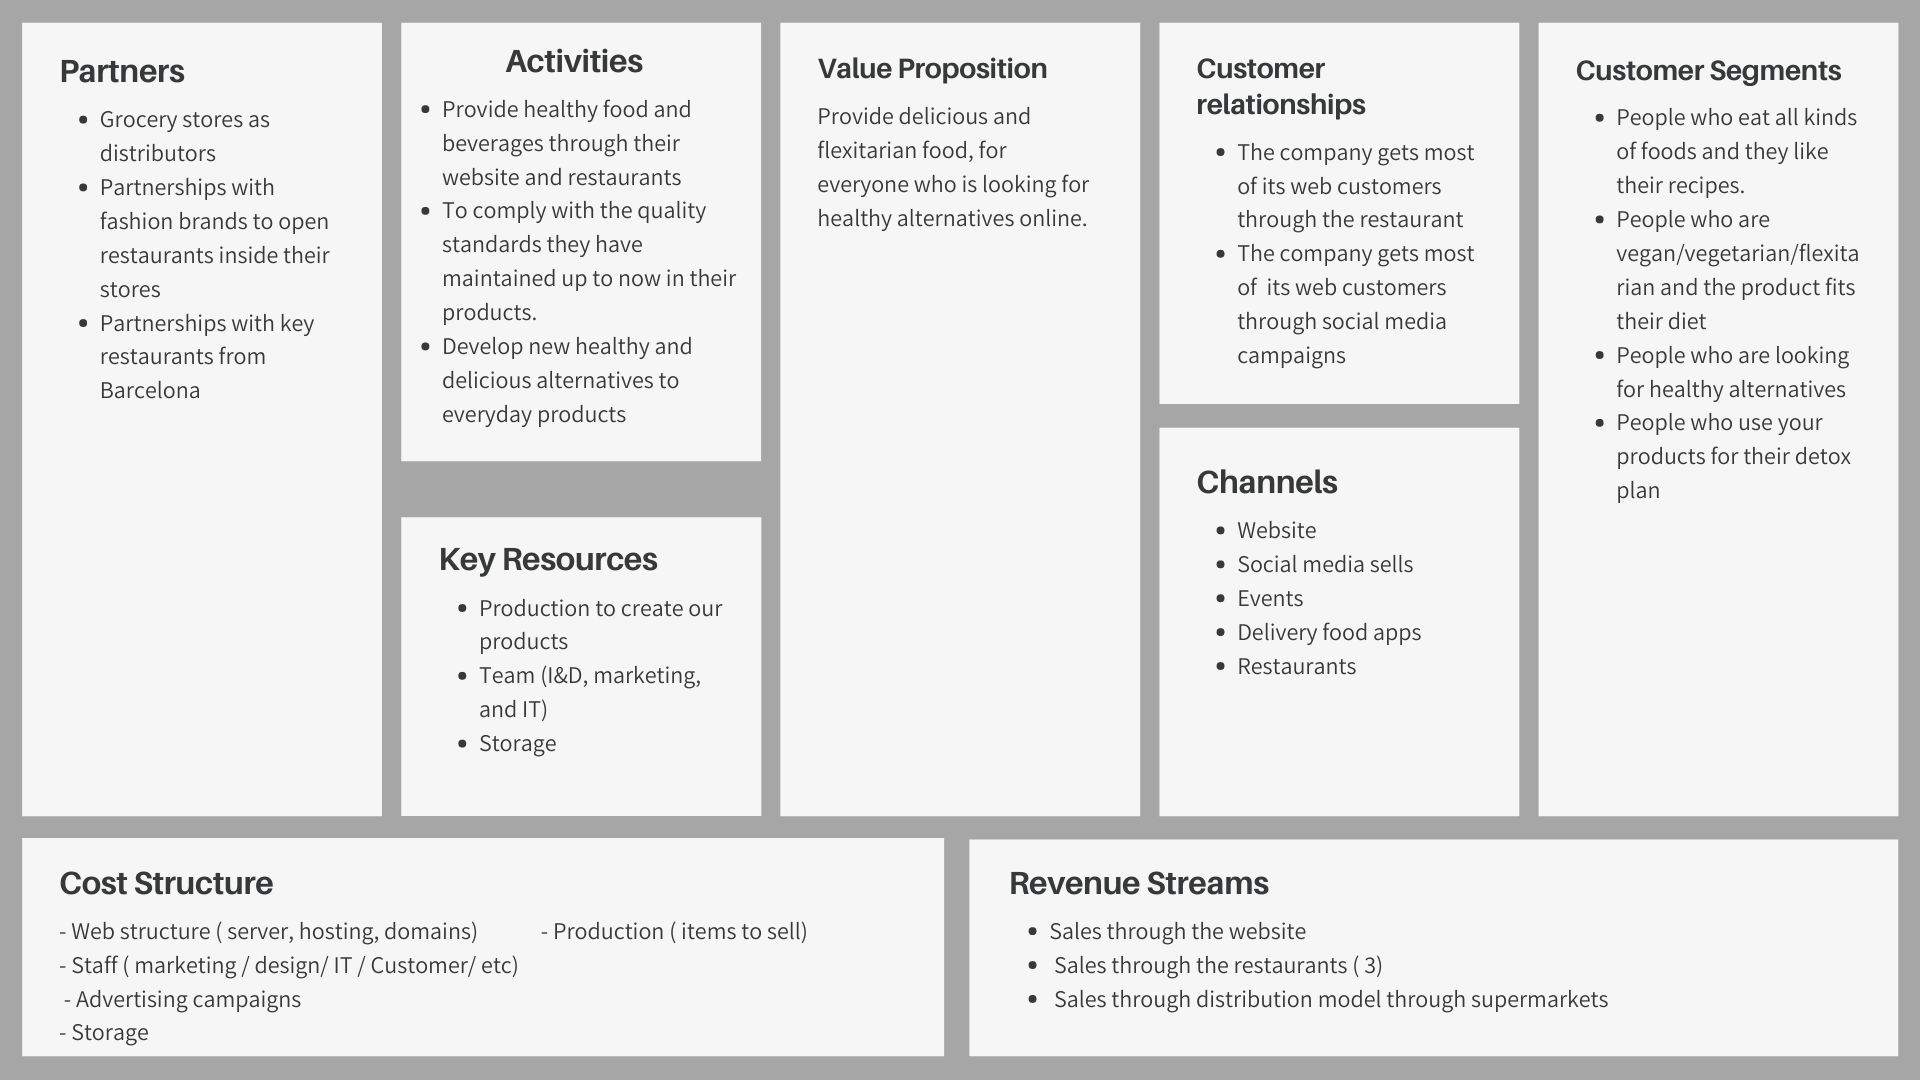 Business Model Canvas build with Canva